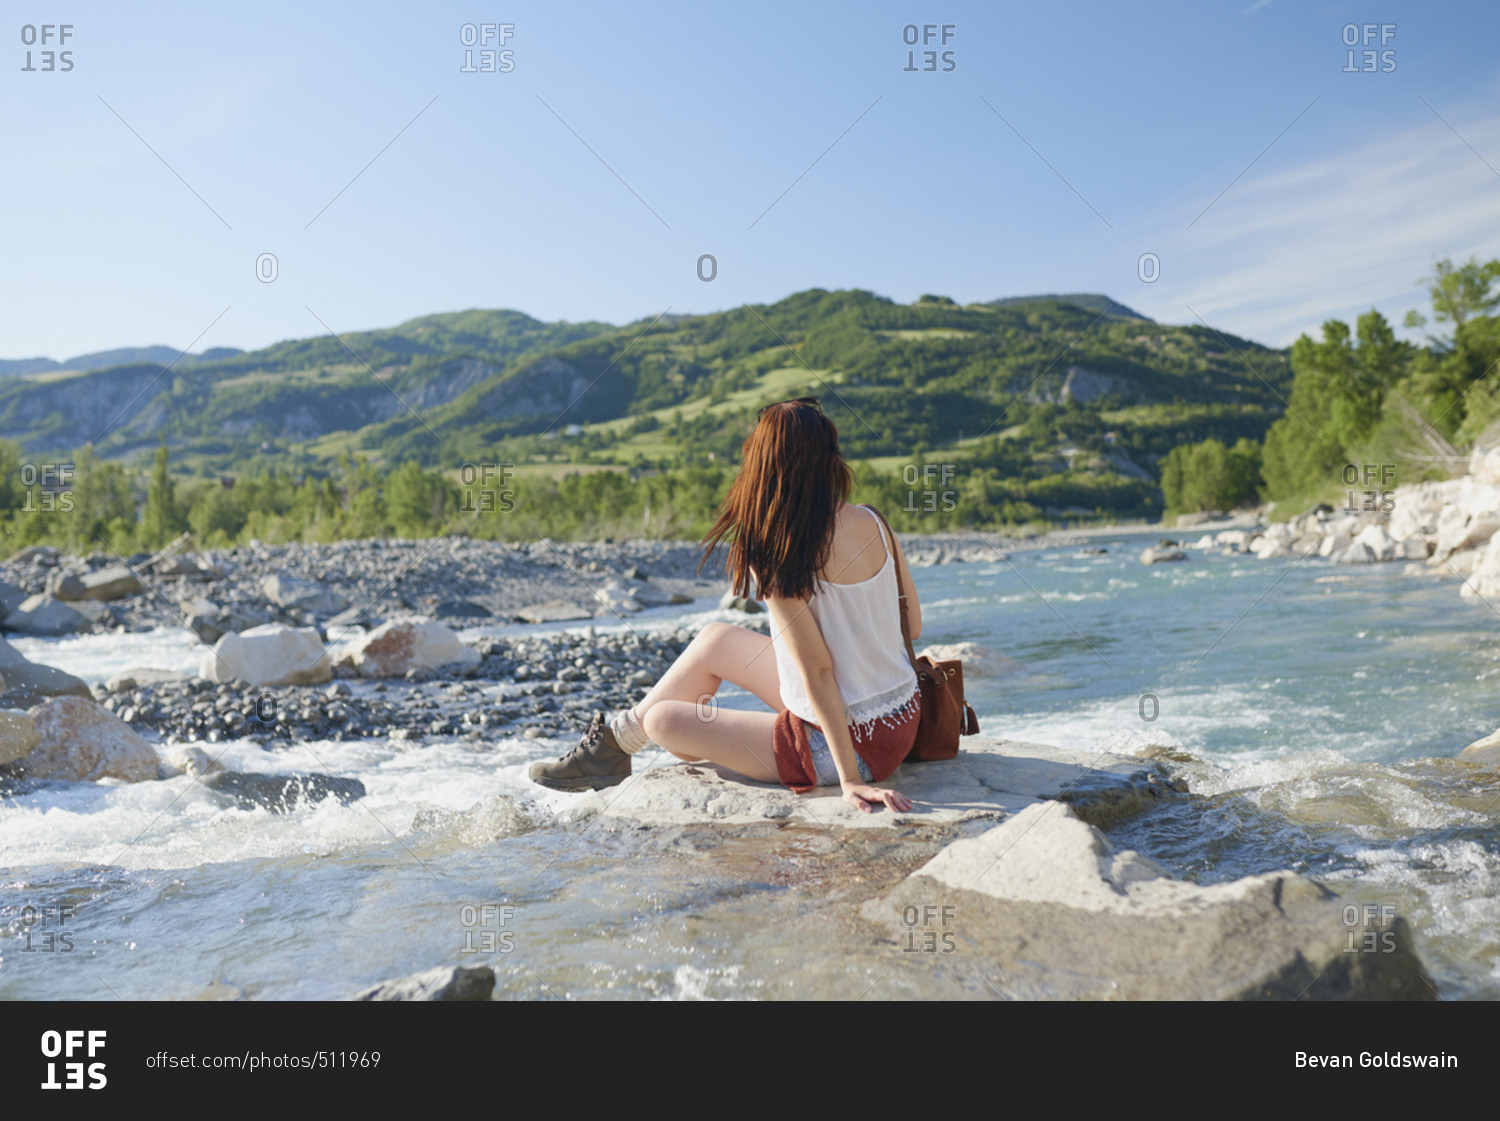 Travel adventure woman sitting on rock in river enjoying scenery view on vacation